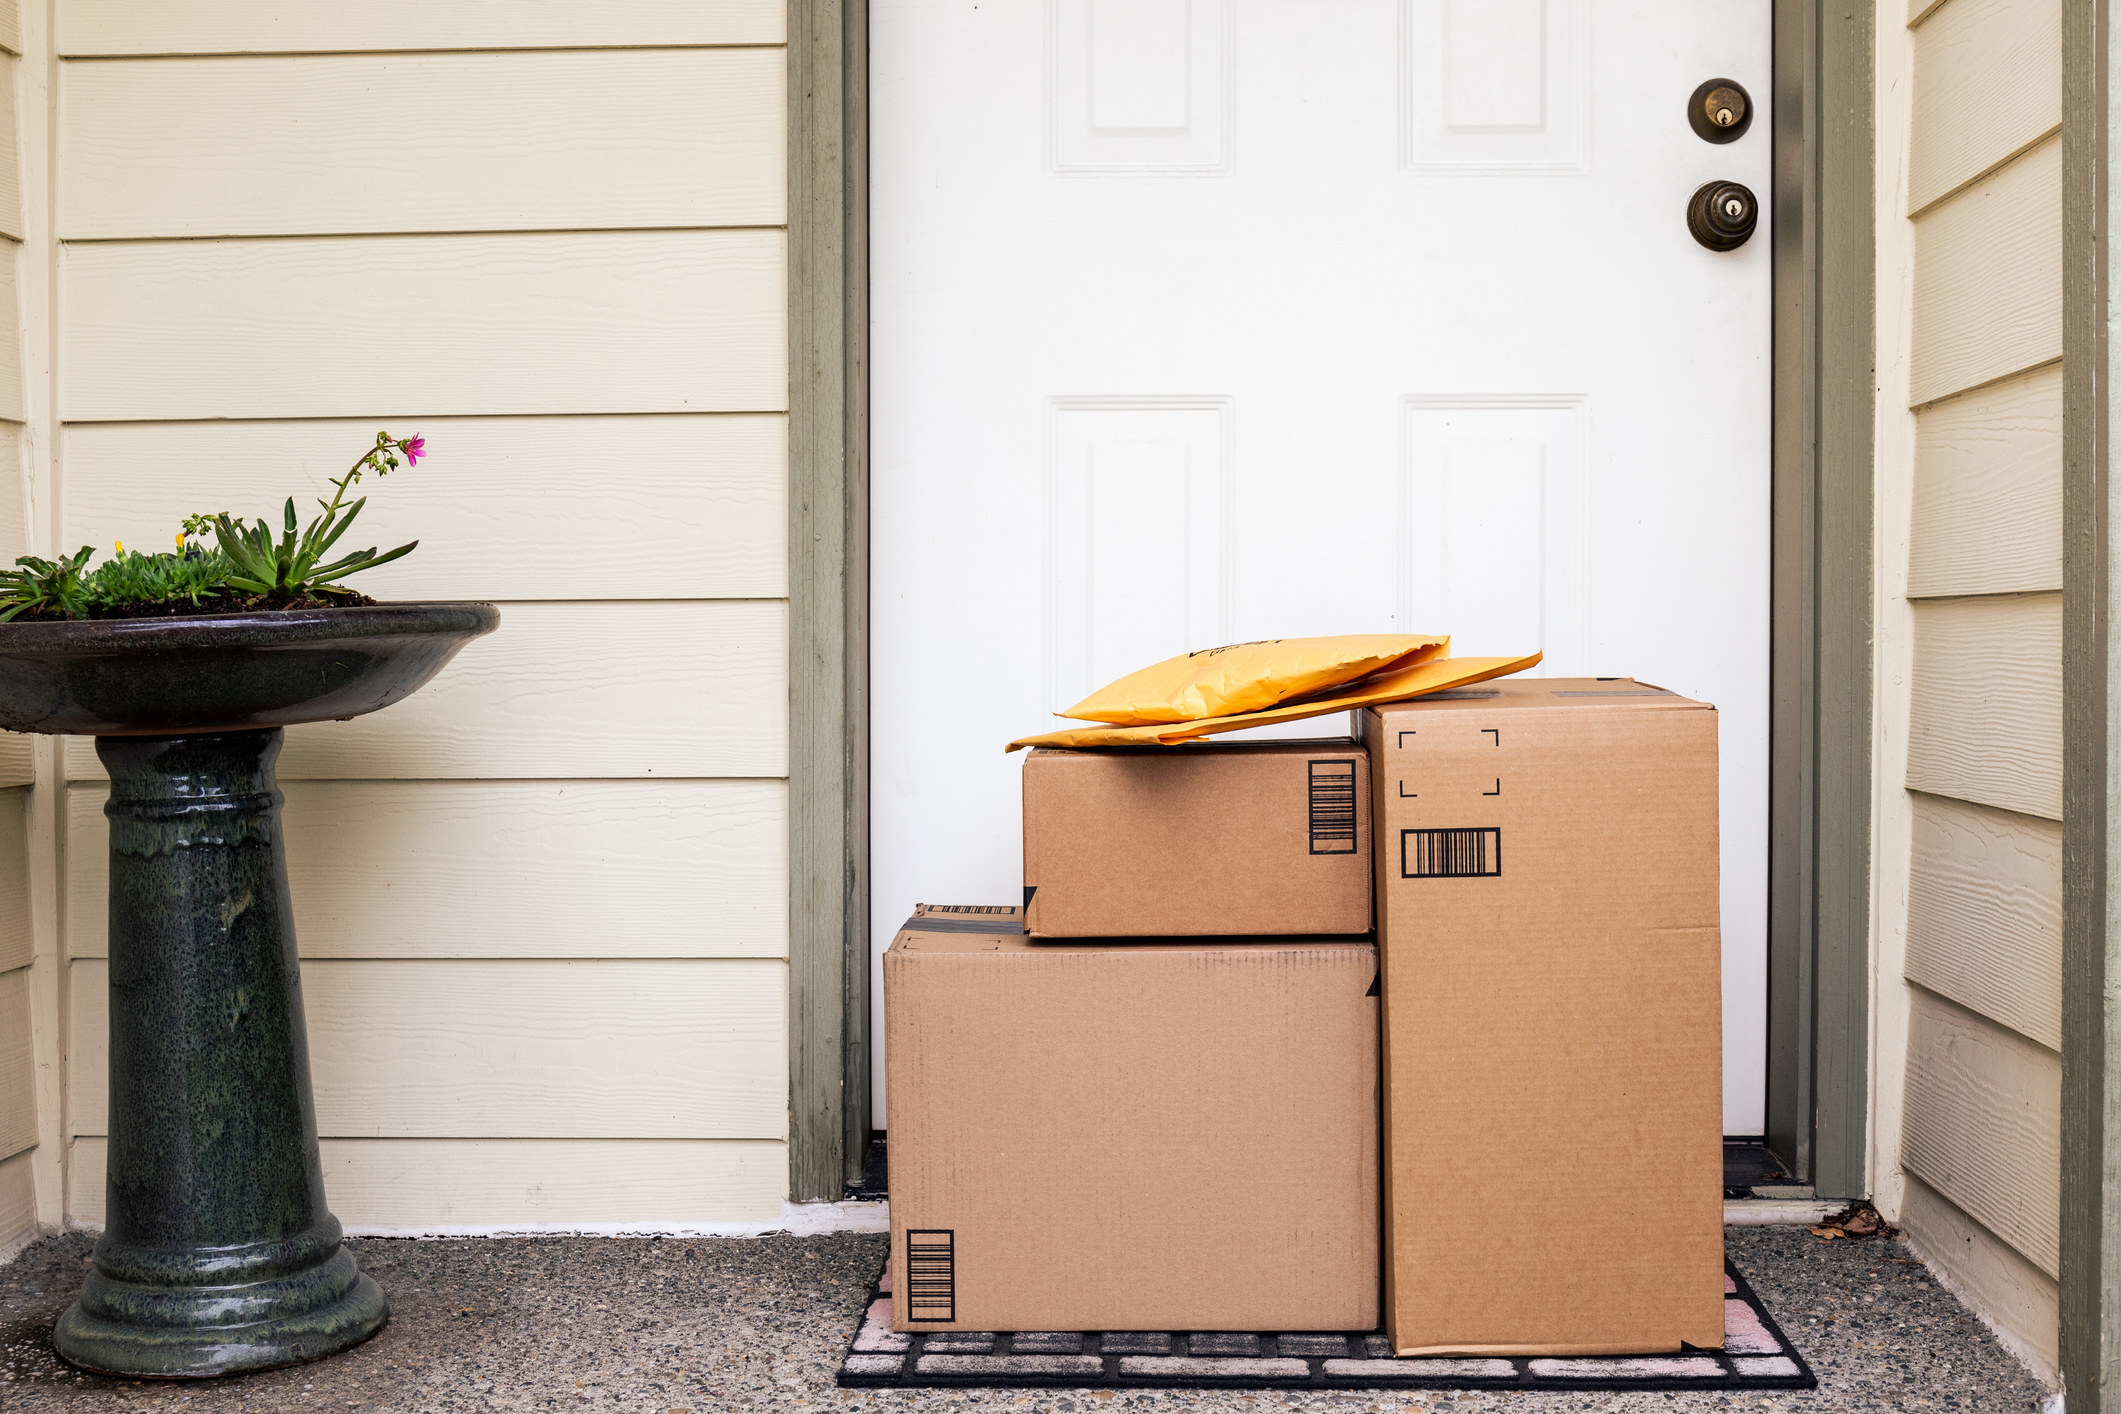 Packages sit at a front door